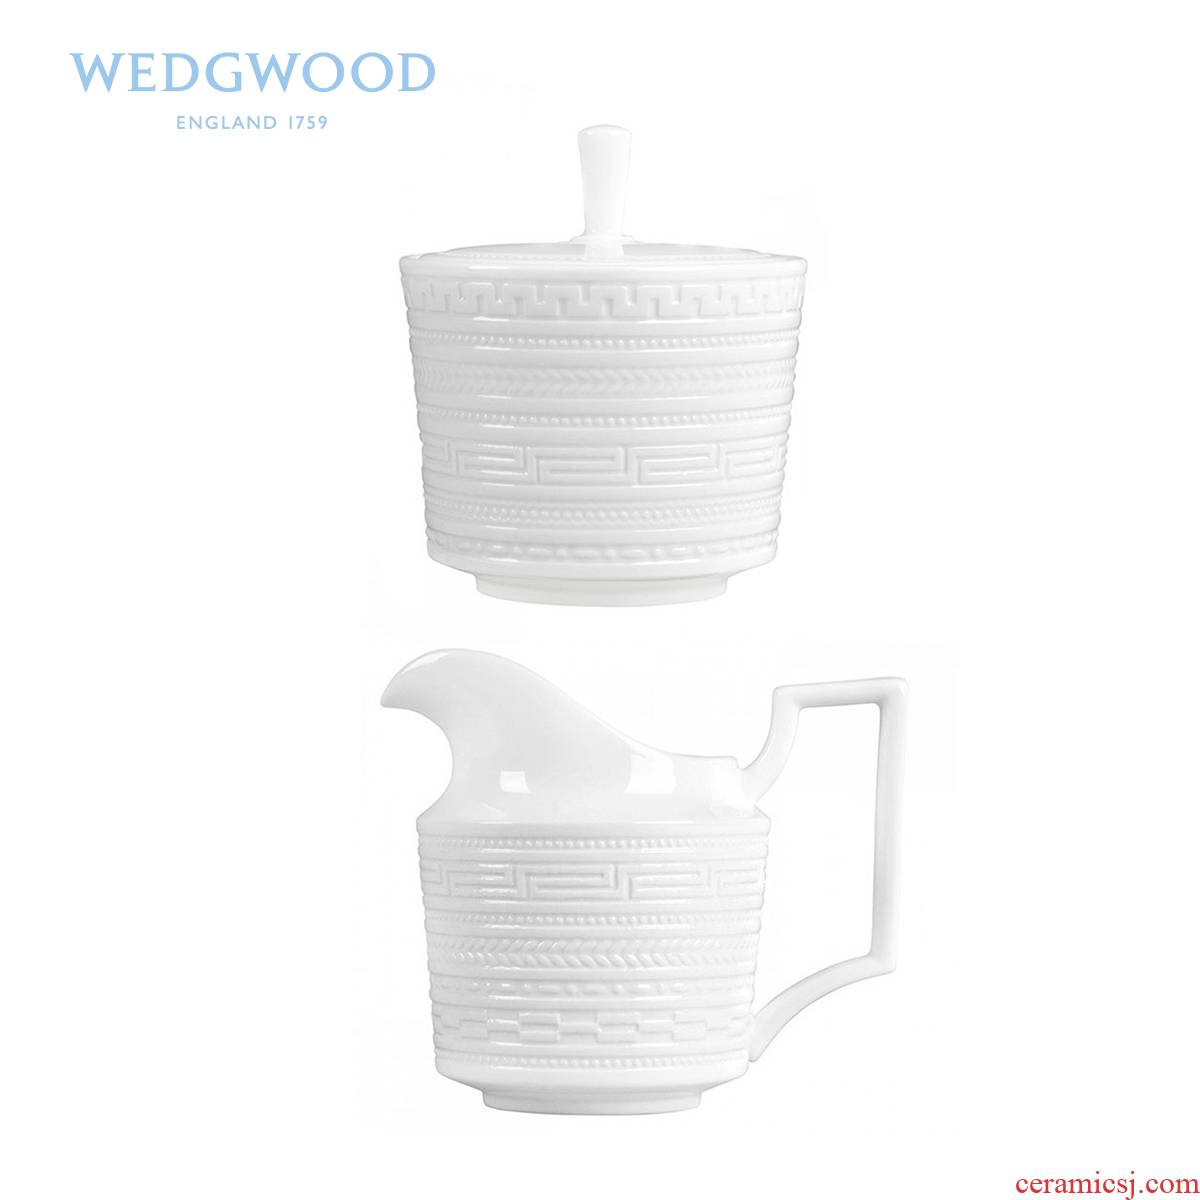 Wedgwood waterford Wedgwood Intaglio anaglyph ipads China milk sugar cylinder cylinder cup sugar water cup suit ipads porcelain bird 's nest